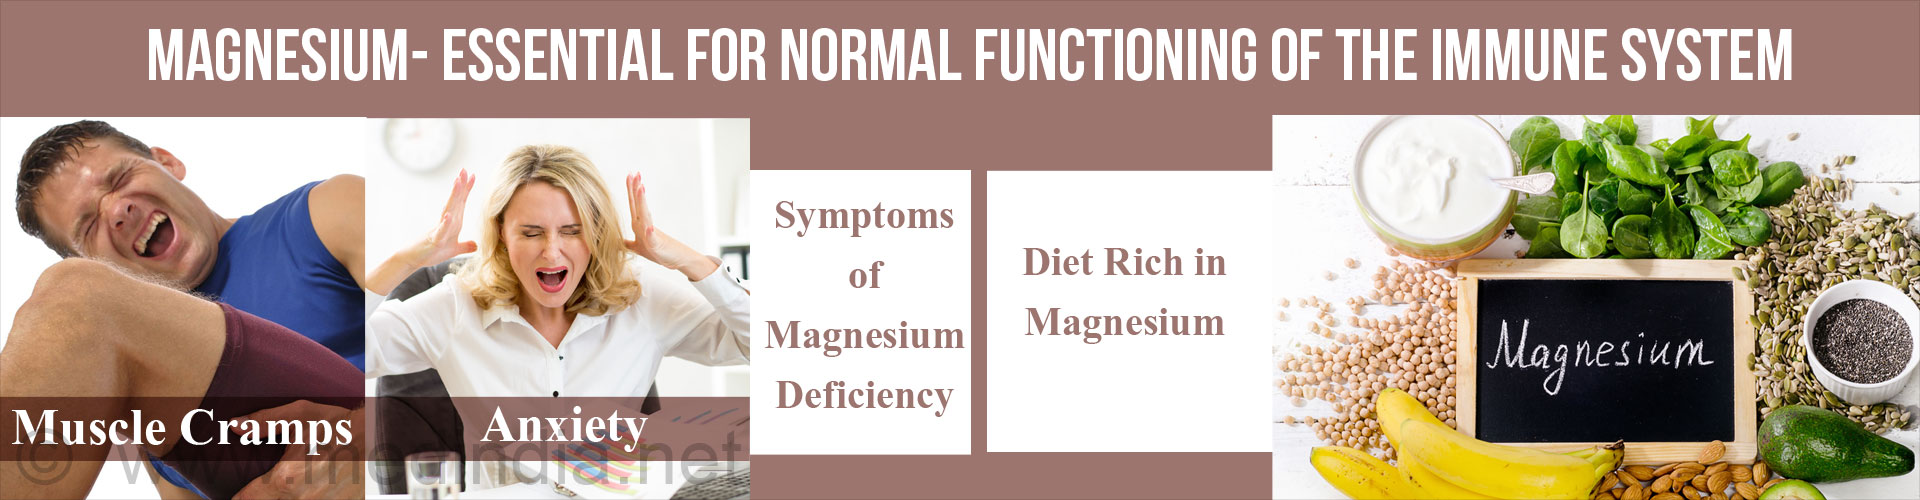 Magnesium - Essential For Normal Functioning of the Immune System
Symptoms of Magnesium
- Muscle Cramps
- Anxiety
Diet rich in magnesium